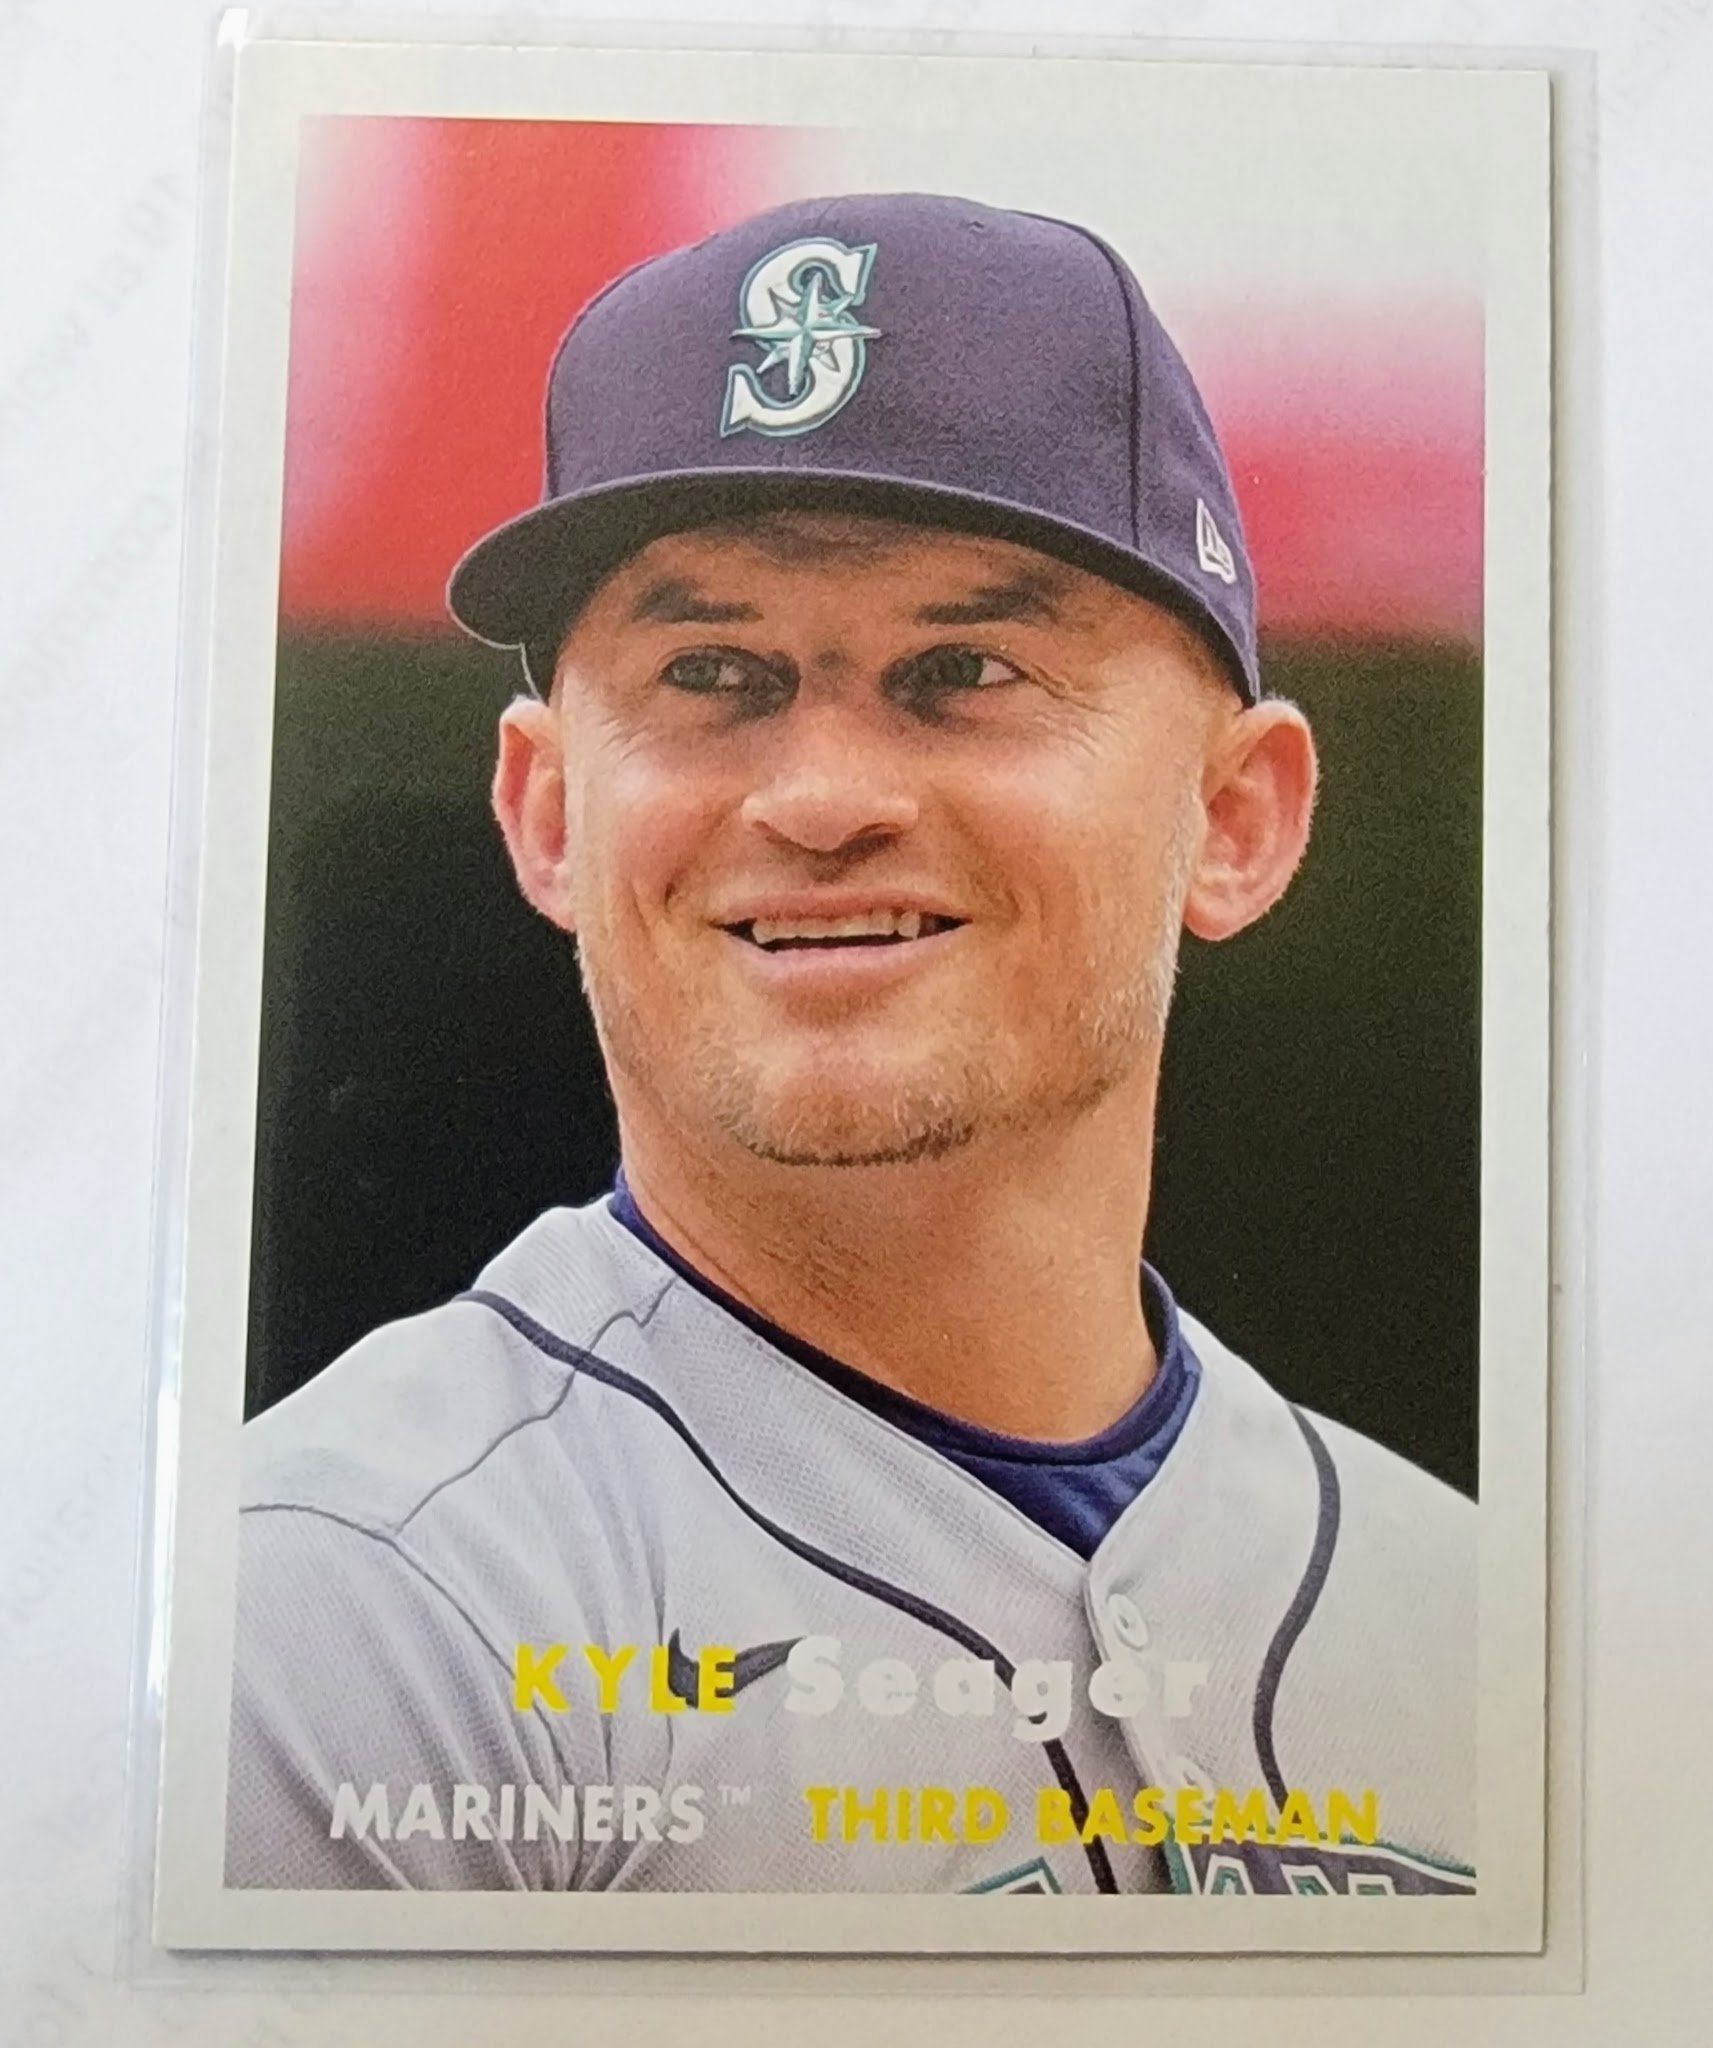 2021 Topps Archives Kyle Seager 1957 Baseball Trading Card SMCB1 simple Xclusive Collectibles   